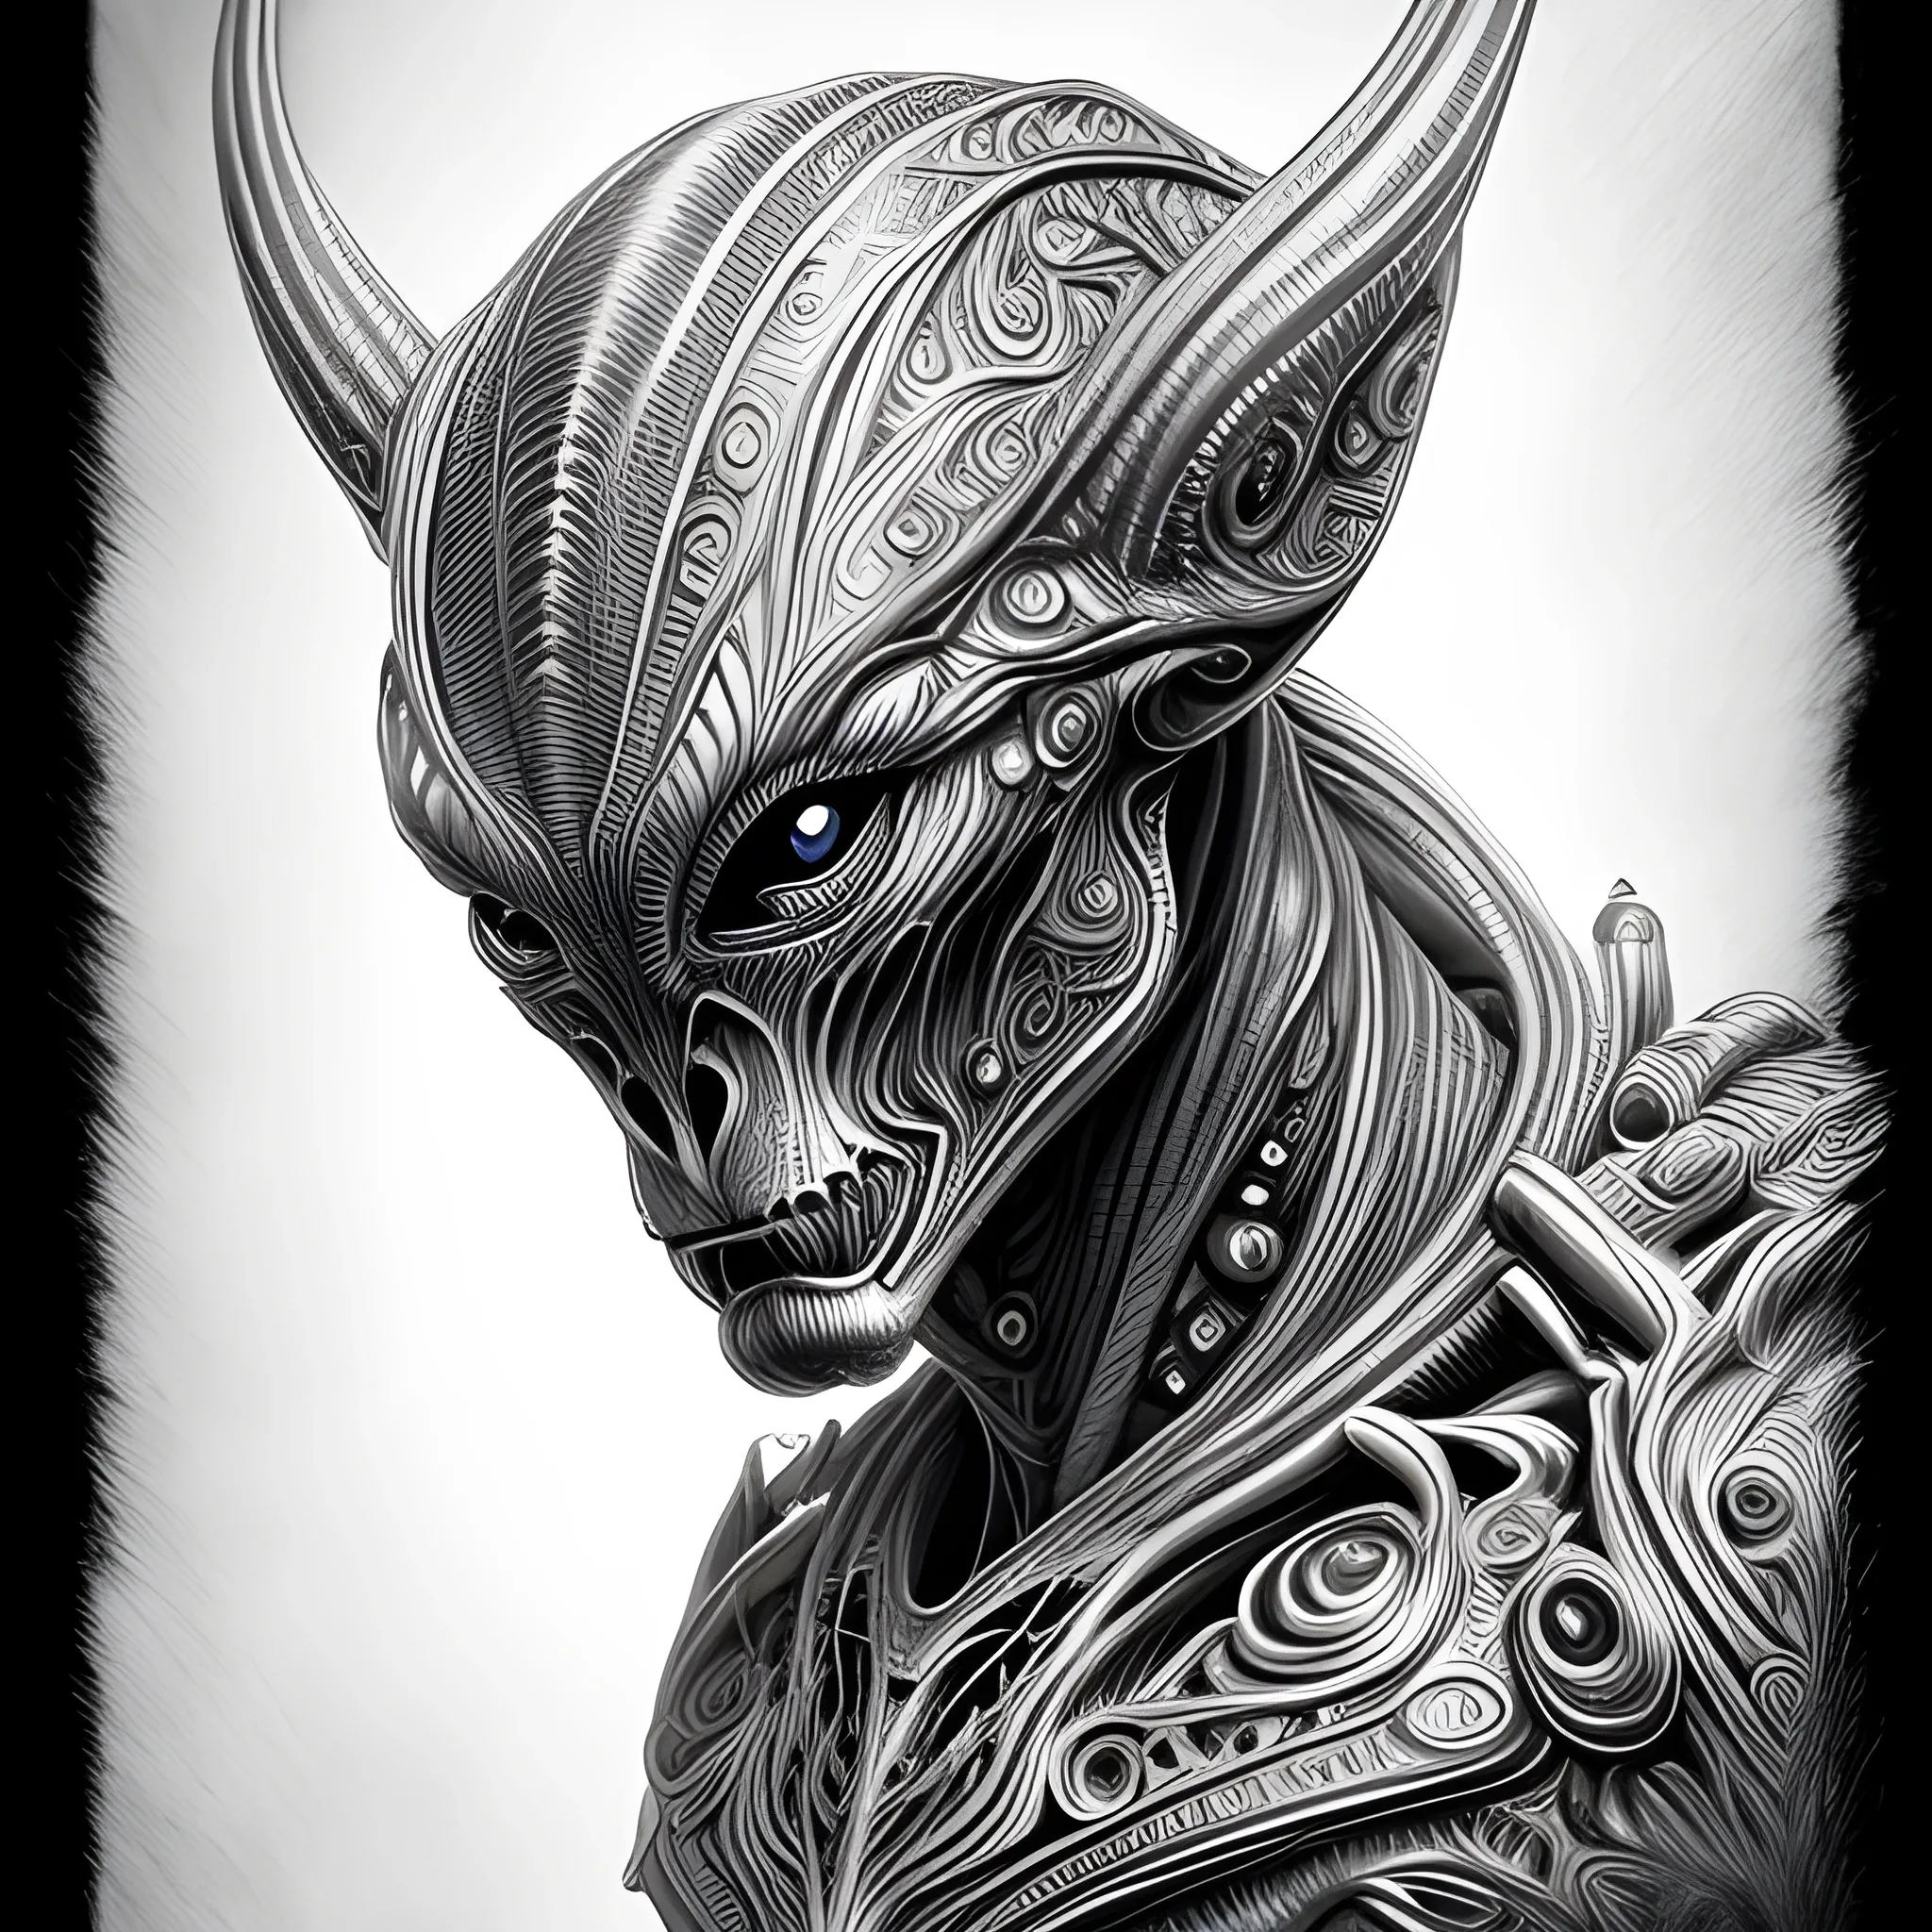 A detailed and intricate digital art piece in a cinematic style, this ultra high resolution portrait of a powerful alien beast is a true masterpiece, Pencil Sketch